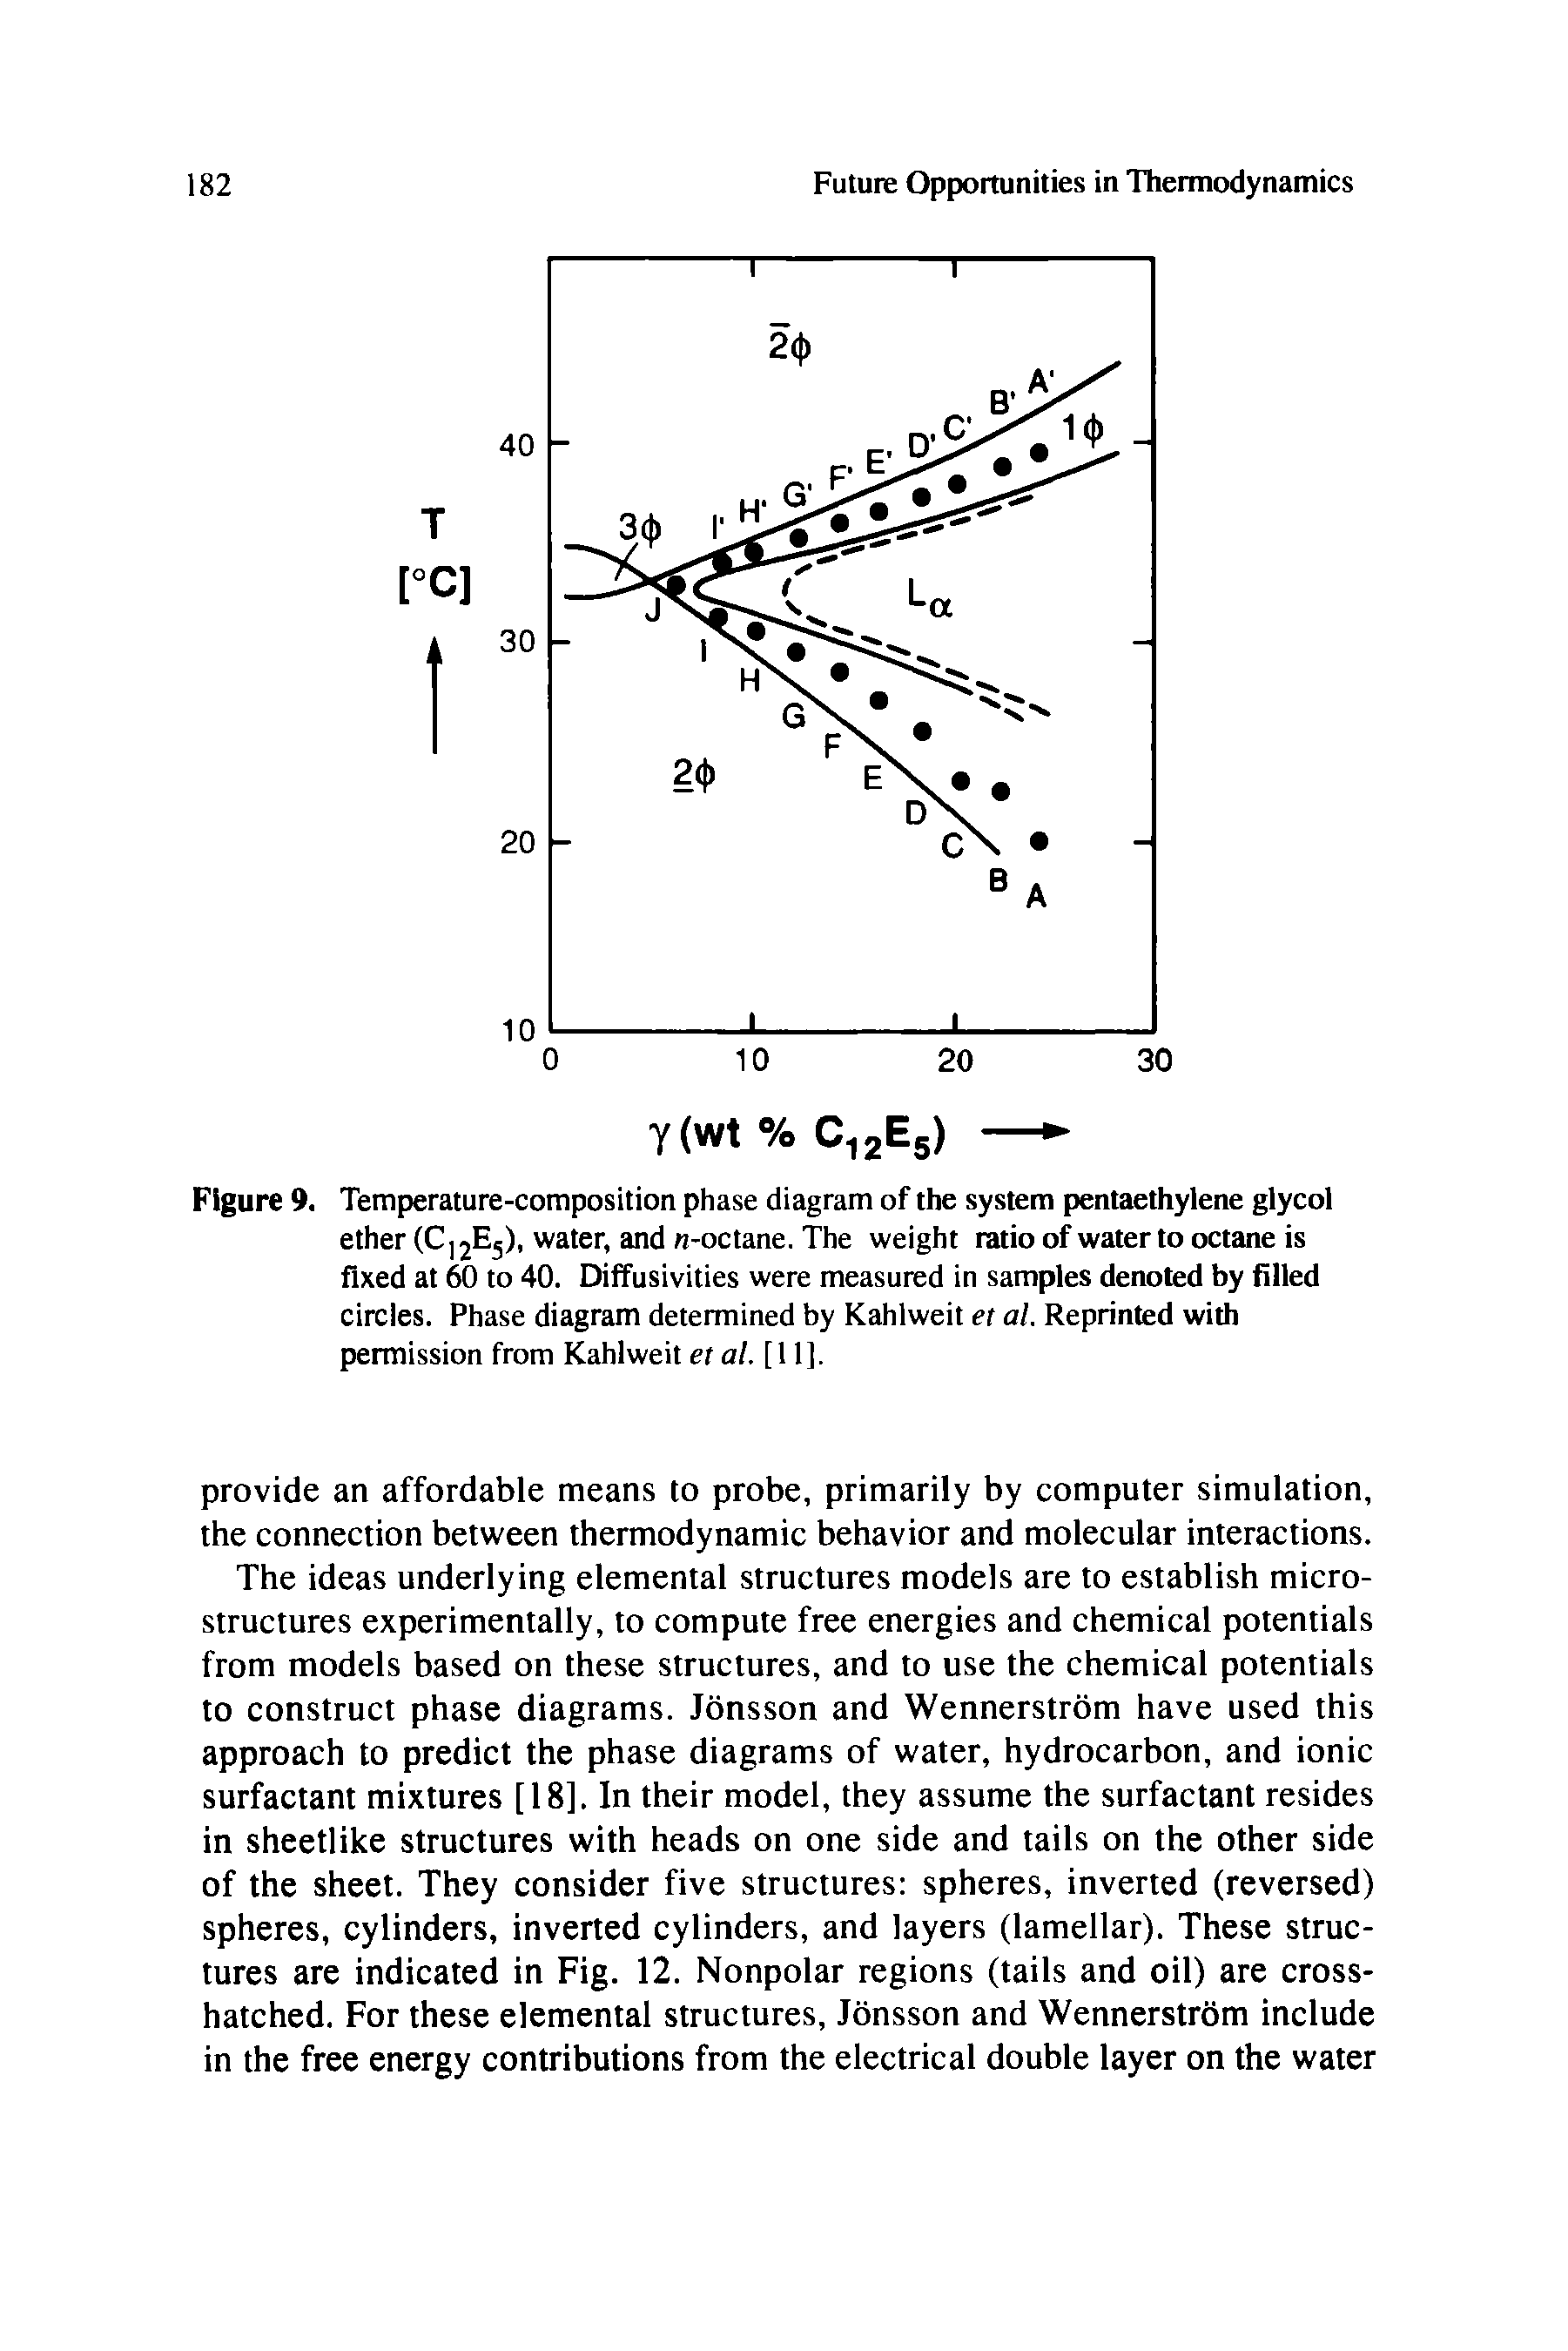 Figure 9. Temperature-composition phase diagram of the system pentaethylene glycol ether (C12E5), water, and n-octane. The weight ratio of water to octane is fixed at 60 to 40. Diffusivities were measured in samples denoted by filled circles. Phase diagram determined by Kahlweit et al. Reprinted with permission from Kahlweit et al. [11],...